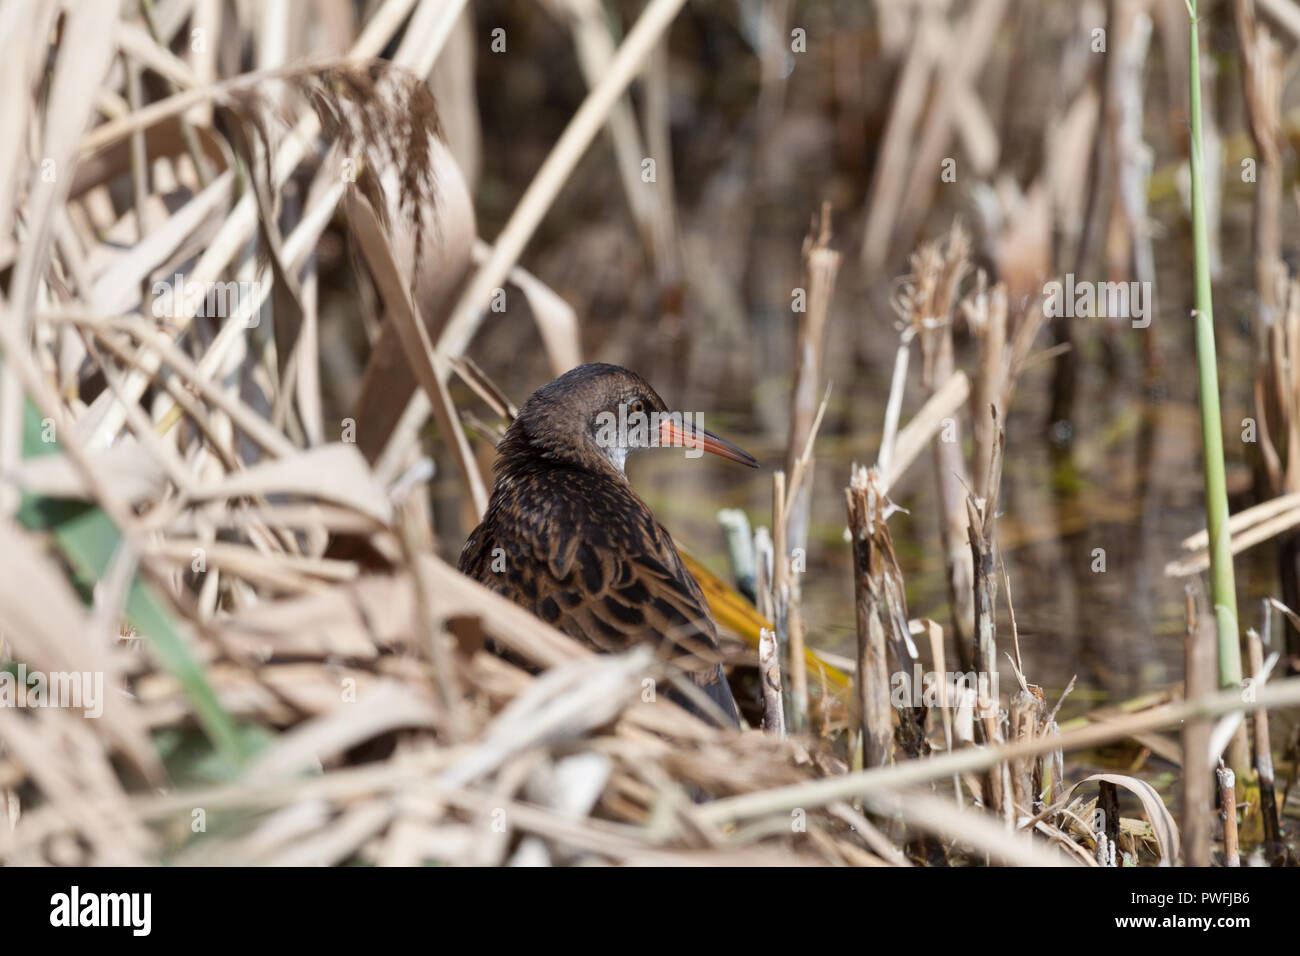 A juvenile, sub-adult water rail (Rallus aquaticus) resting, preening and exploring a reed bed in Worcestershire, UK. Stock Photo